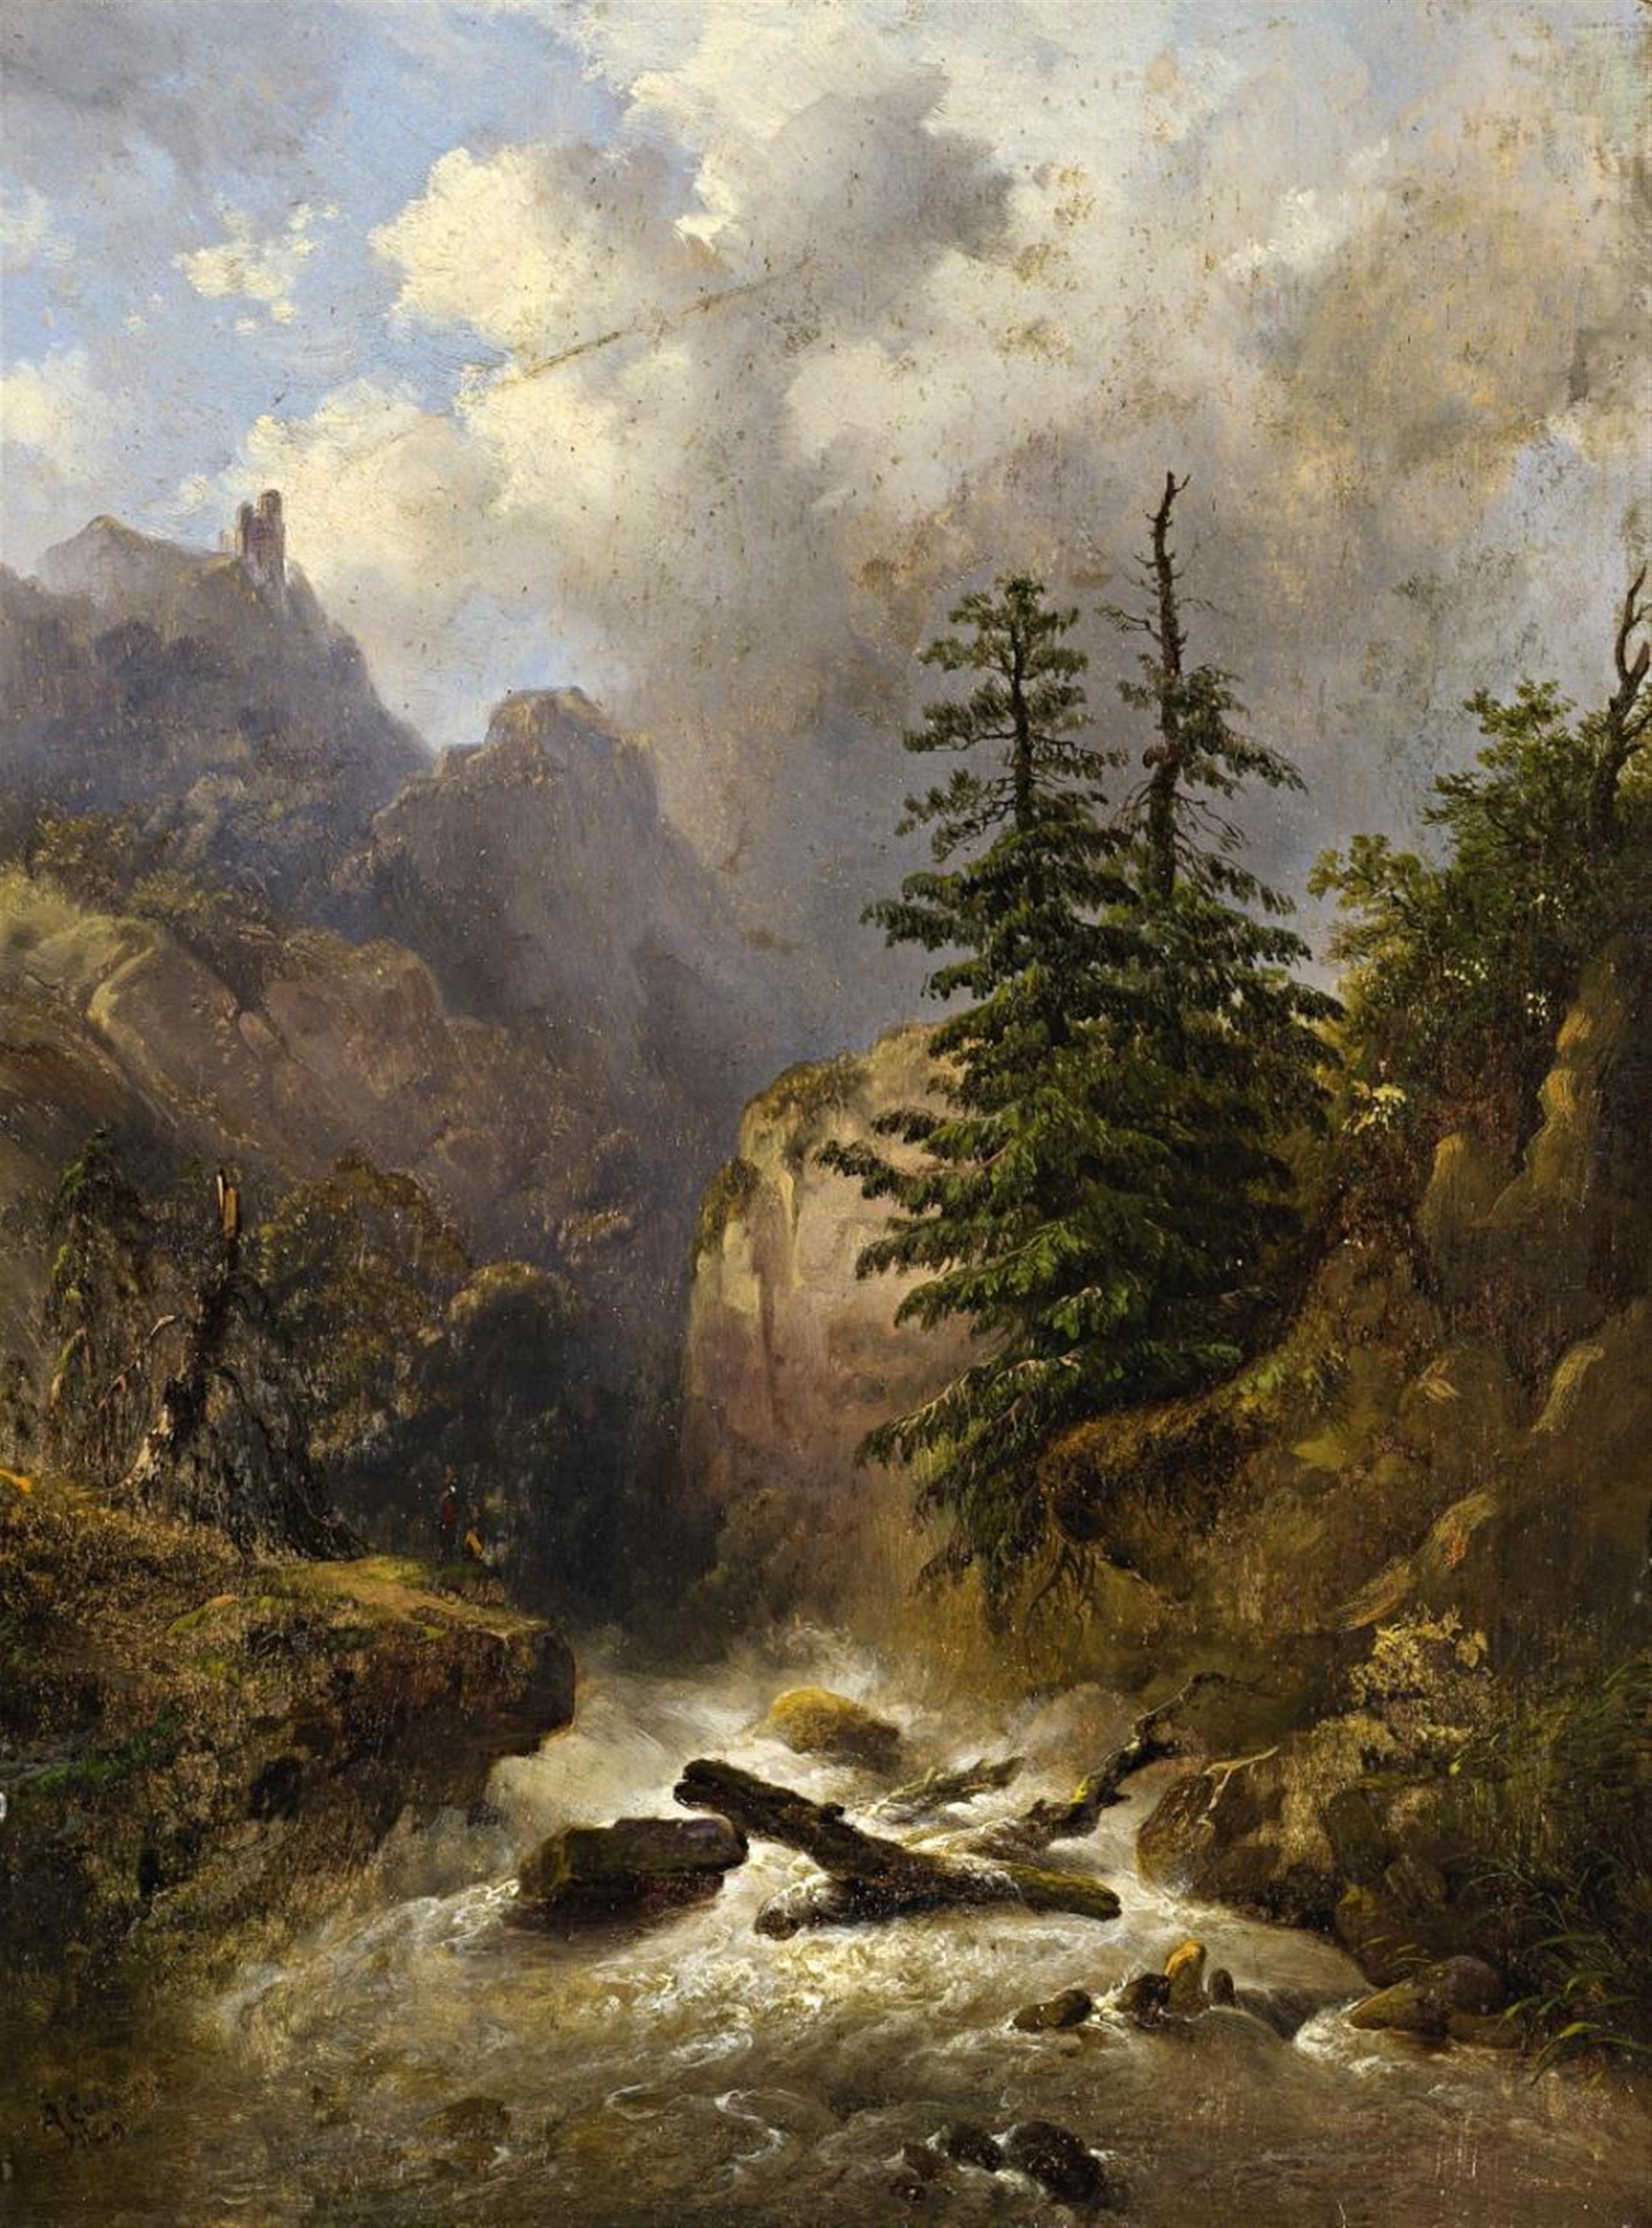 Alexandre Calame - A Moutainous Landscape with a Stream and Pine - image-1